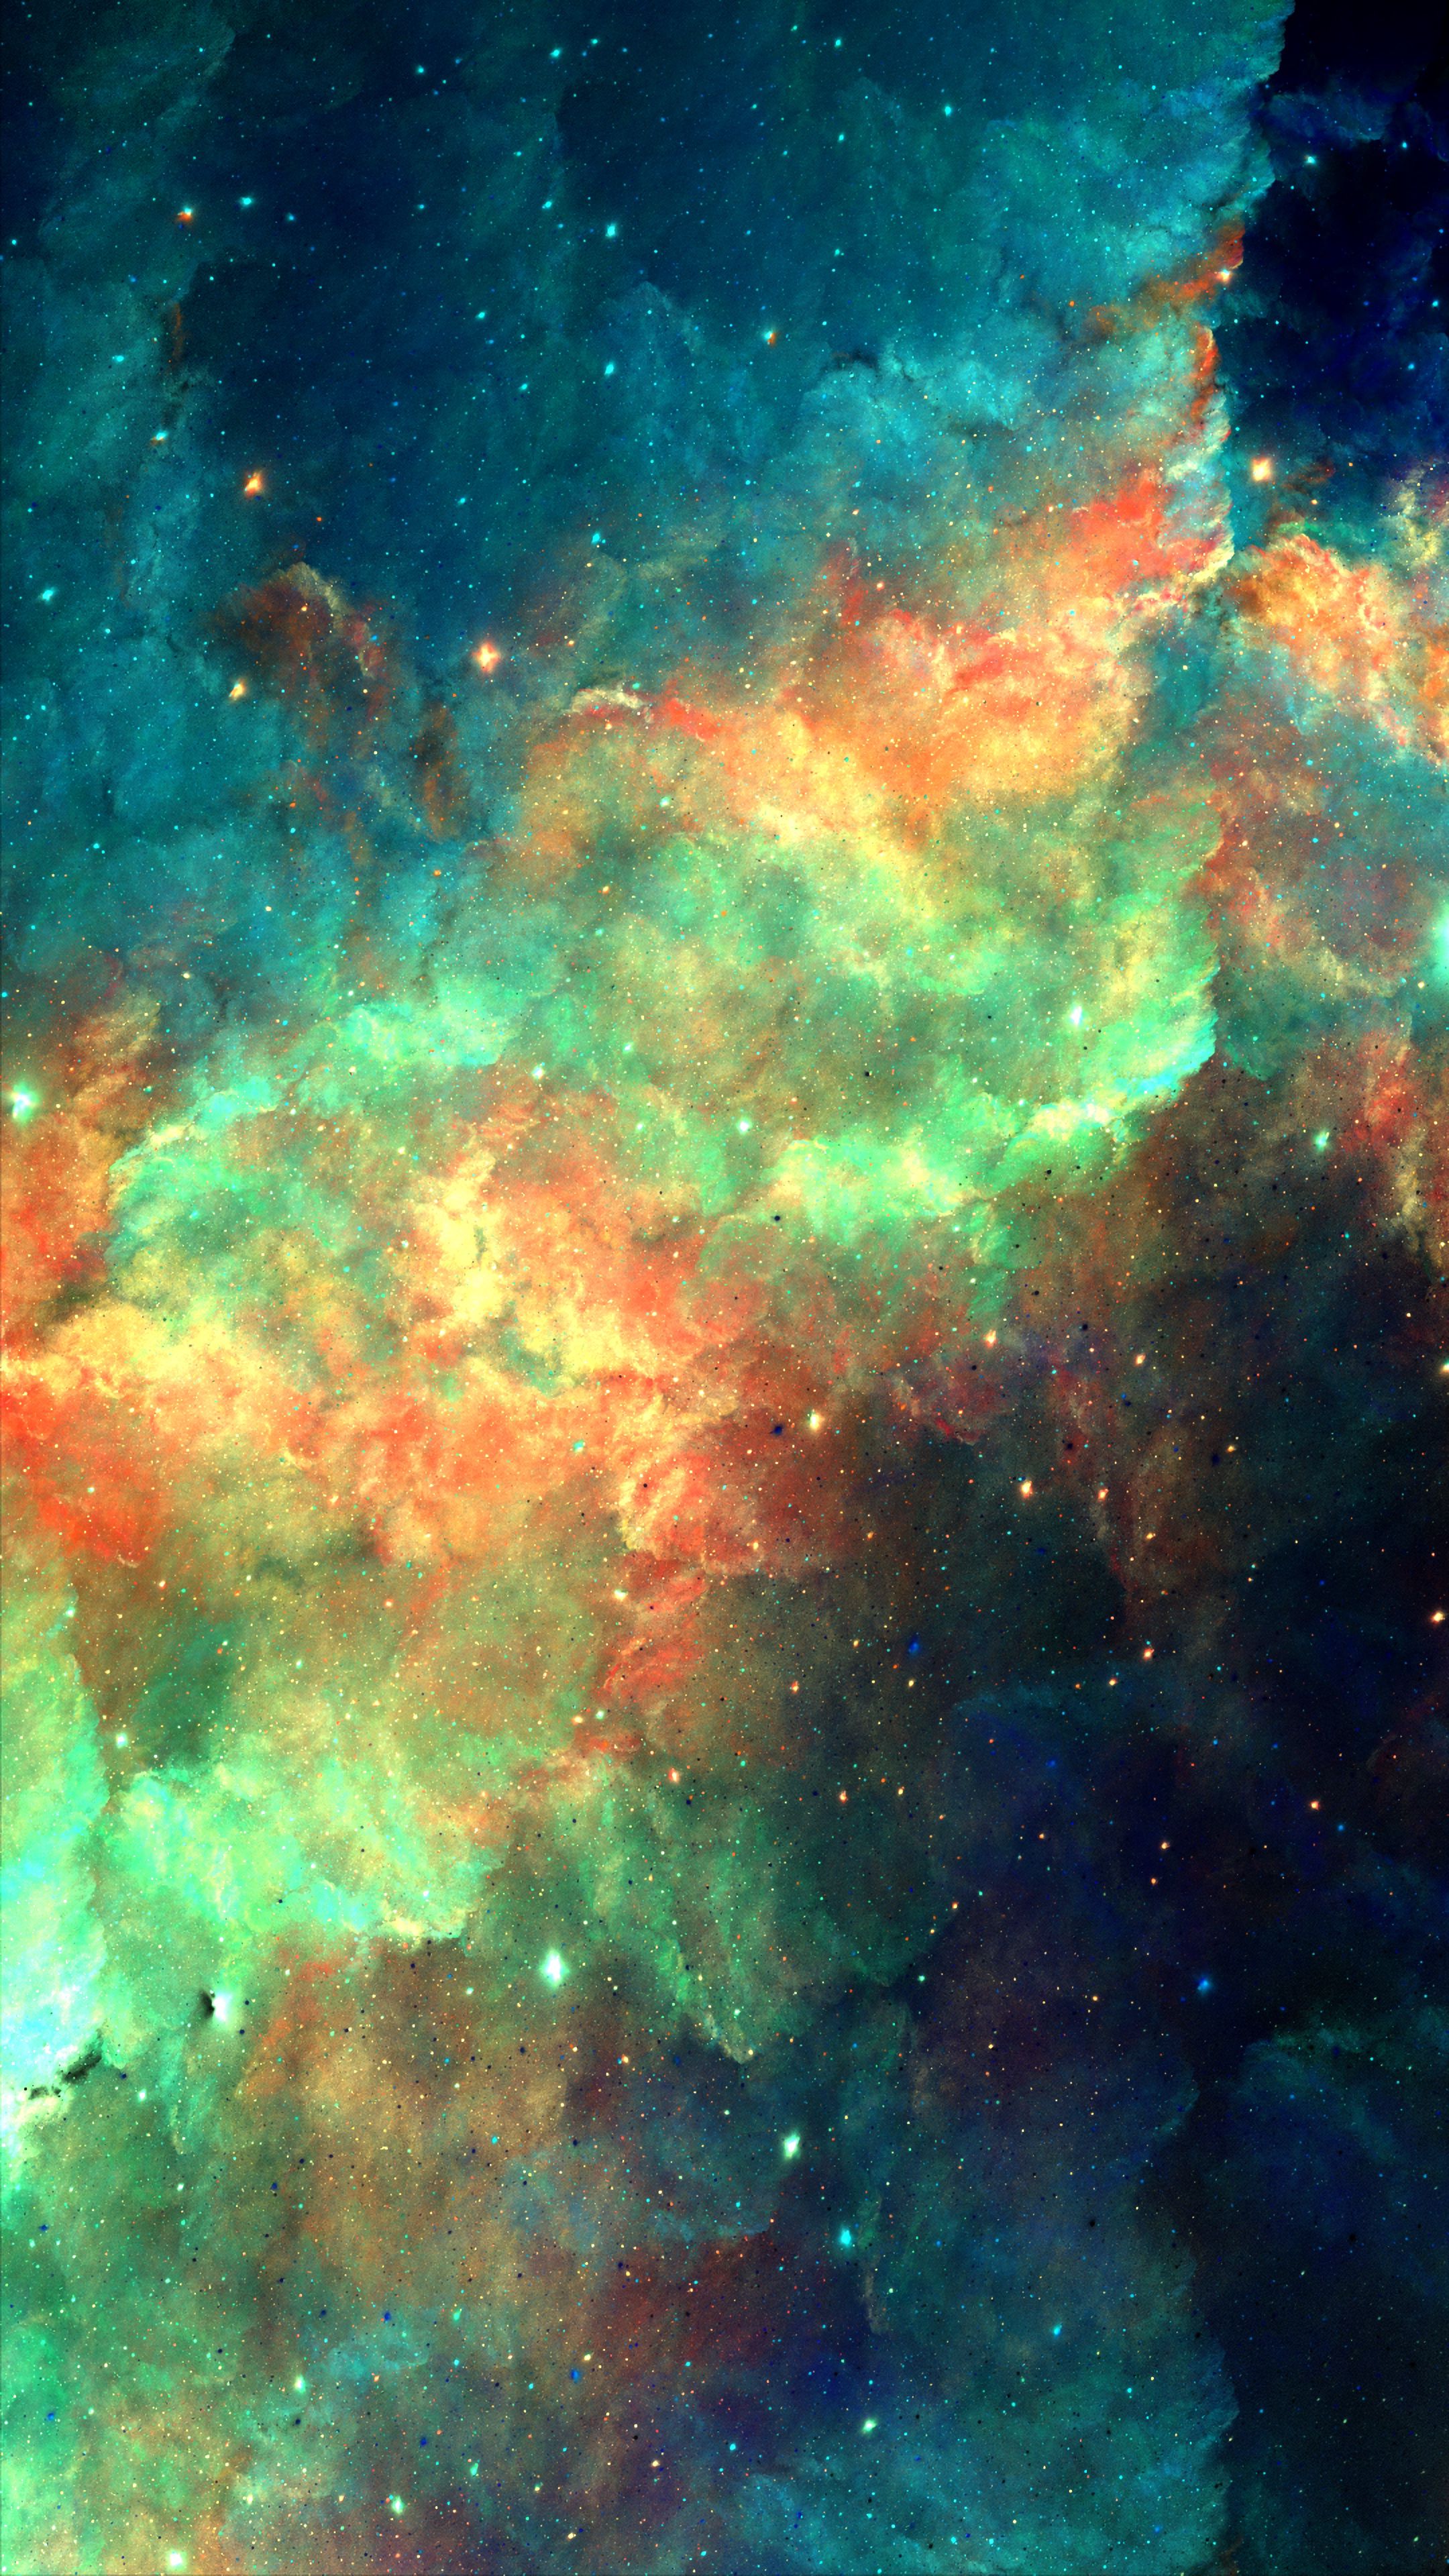 sparks, nebula, abstract, multicolored, motley, cloud High Definition image